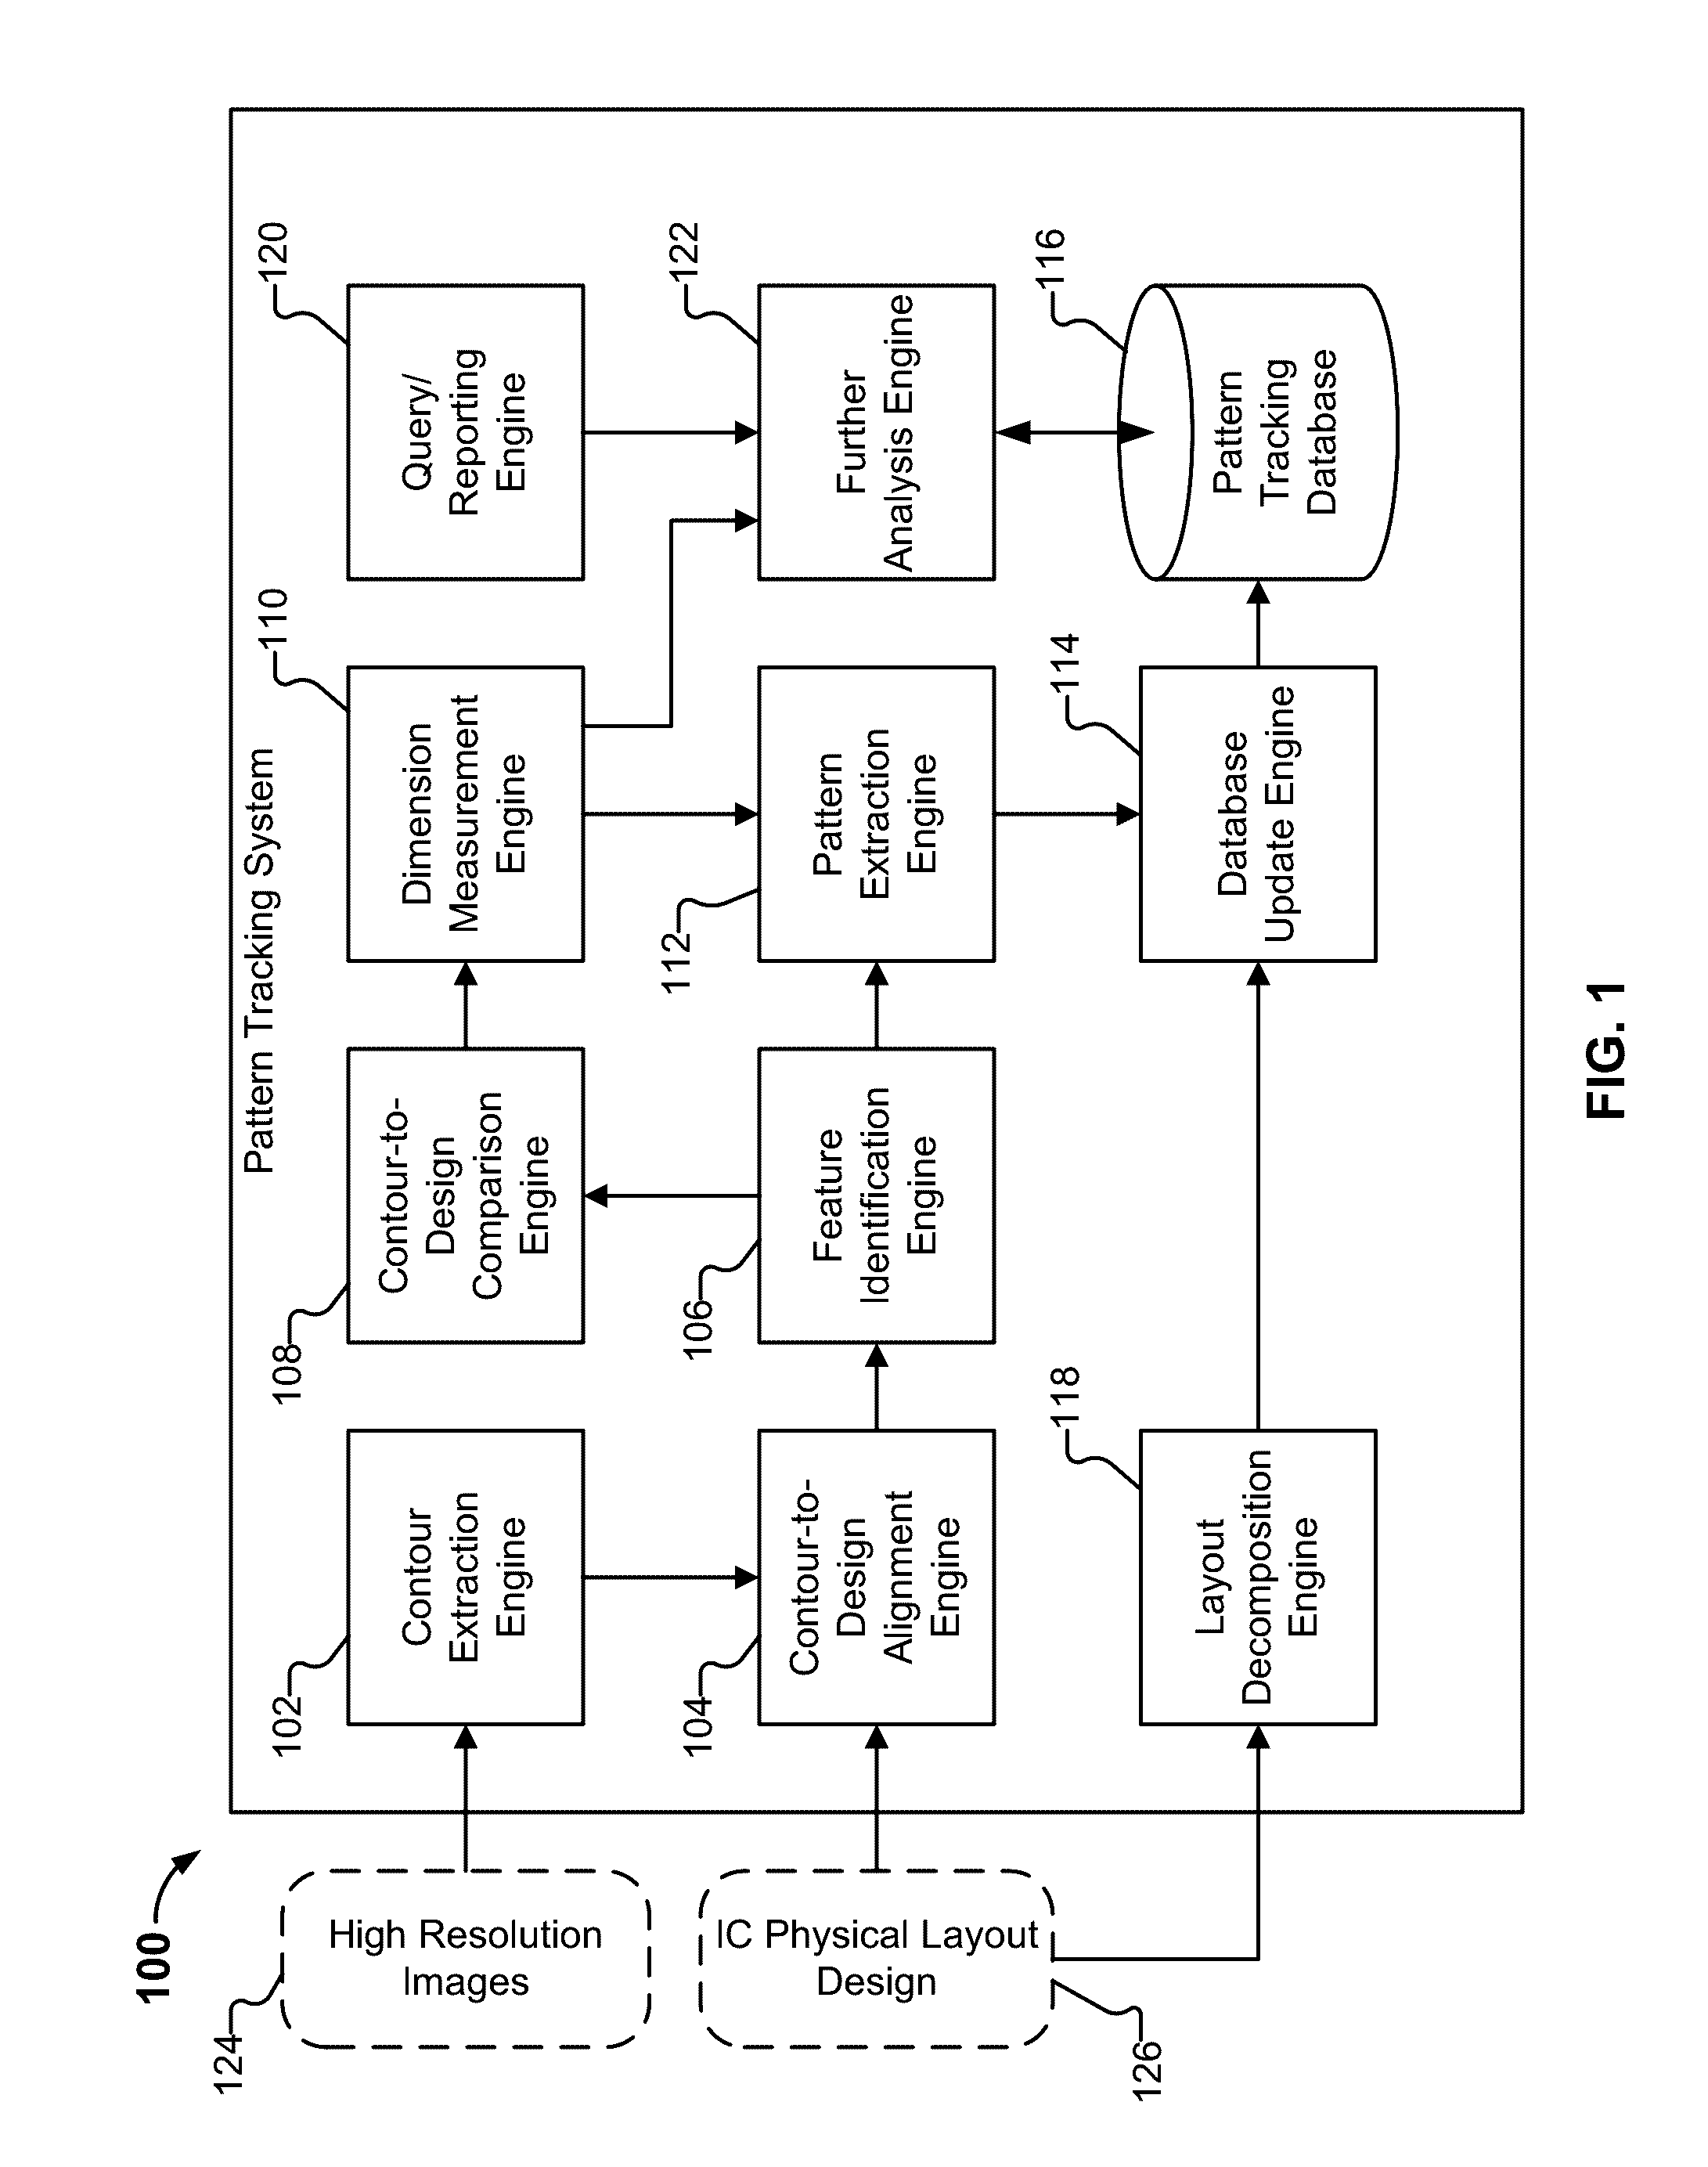 Pattern weakness and strength detection and tracking during a semiconductor device fabrication process